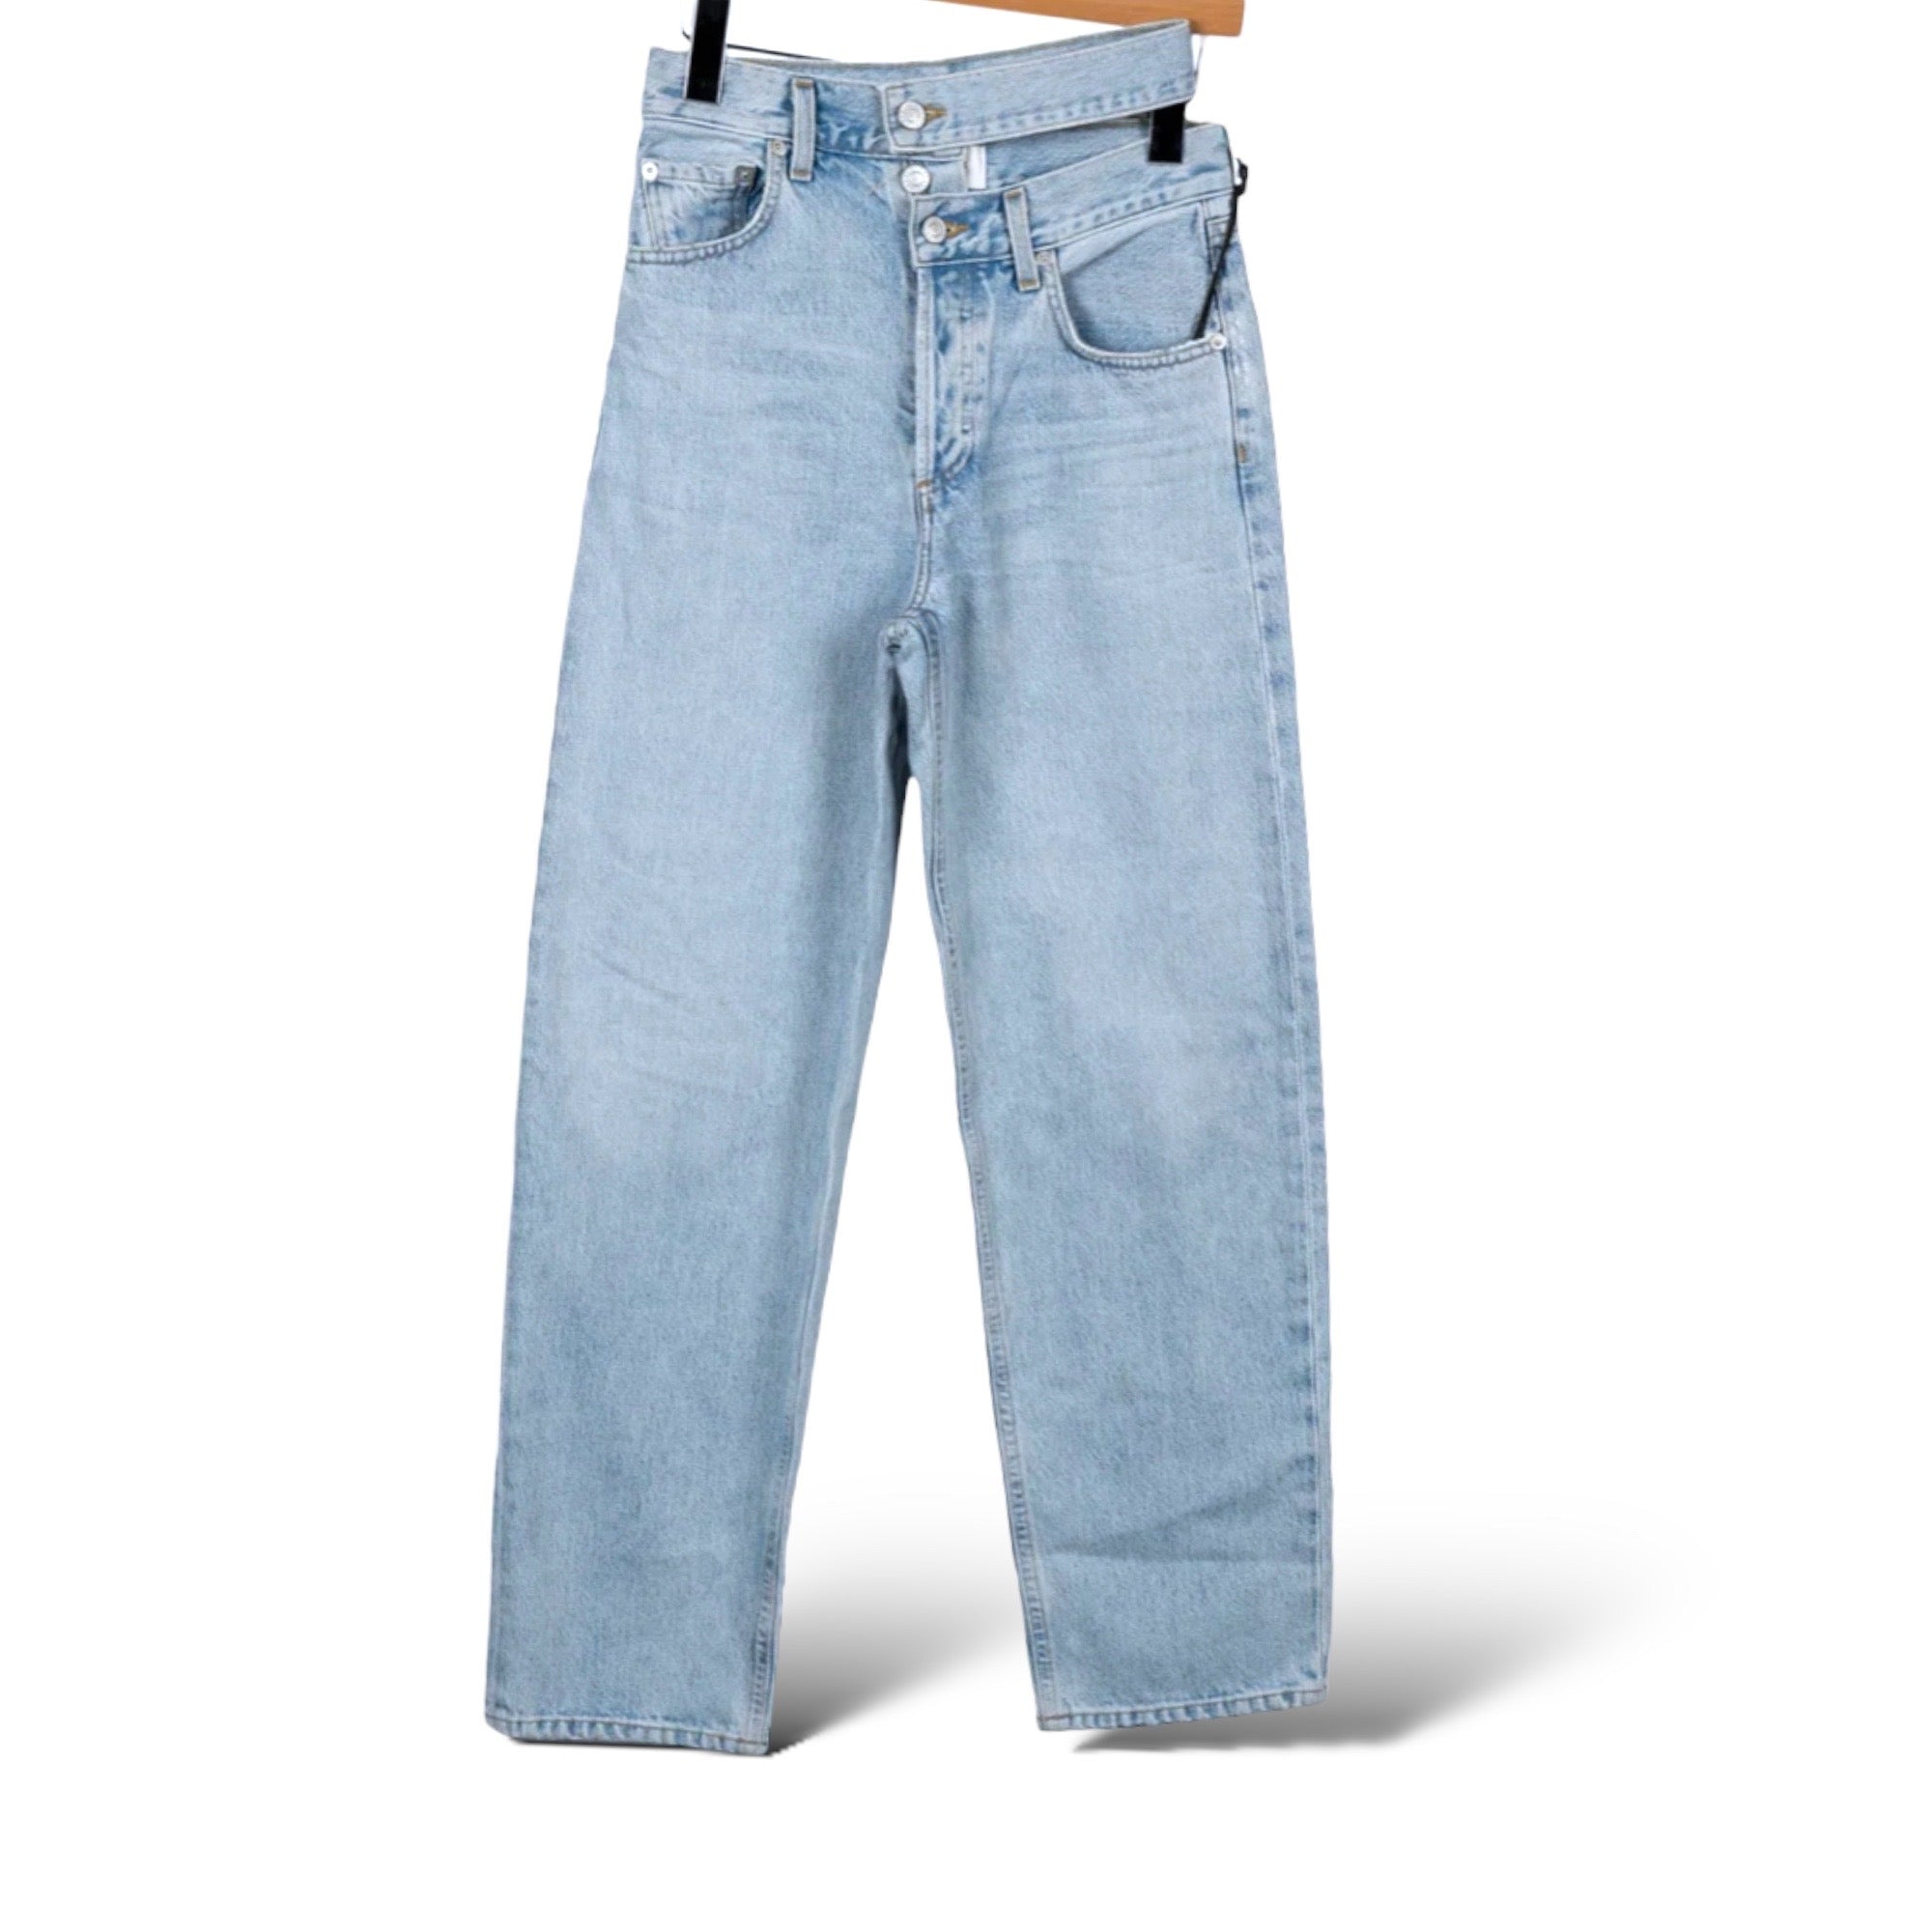 AGOLDE High-Rise Straight Leg Jeans
| Size: XS | US 24 |